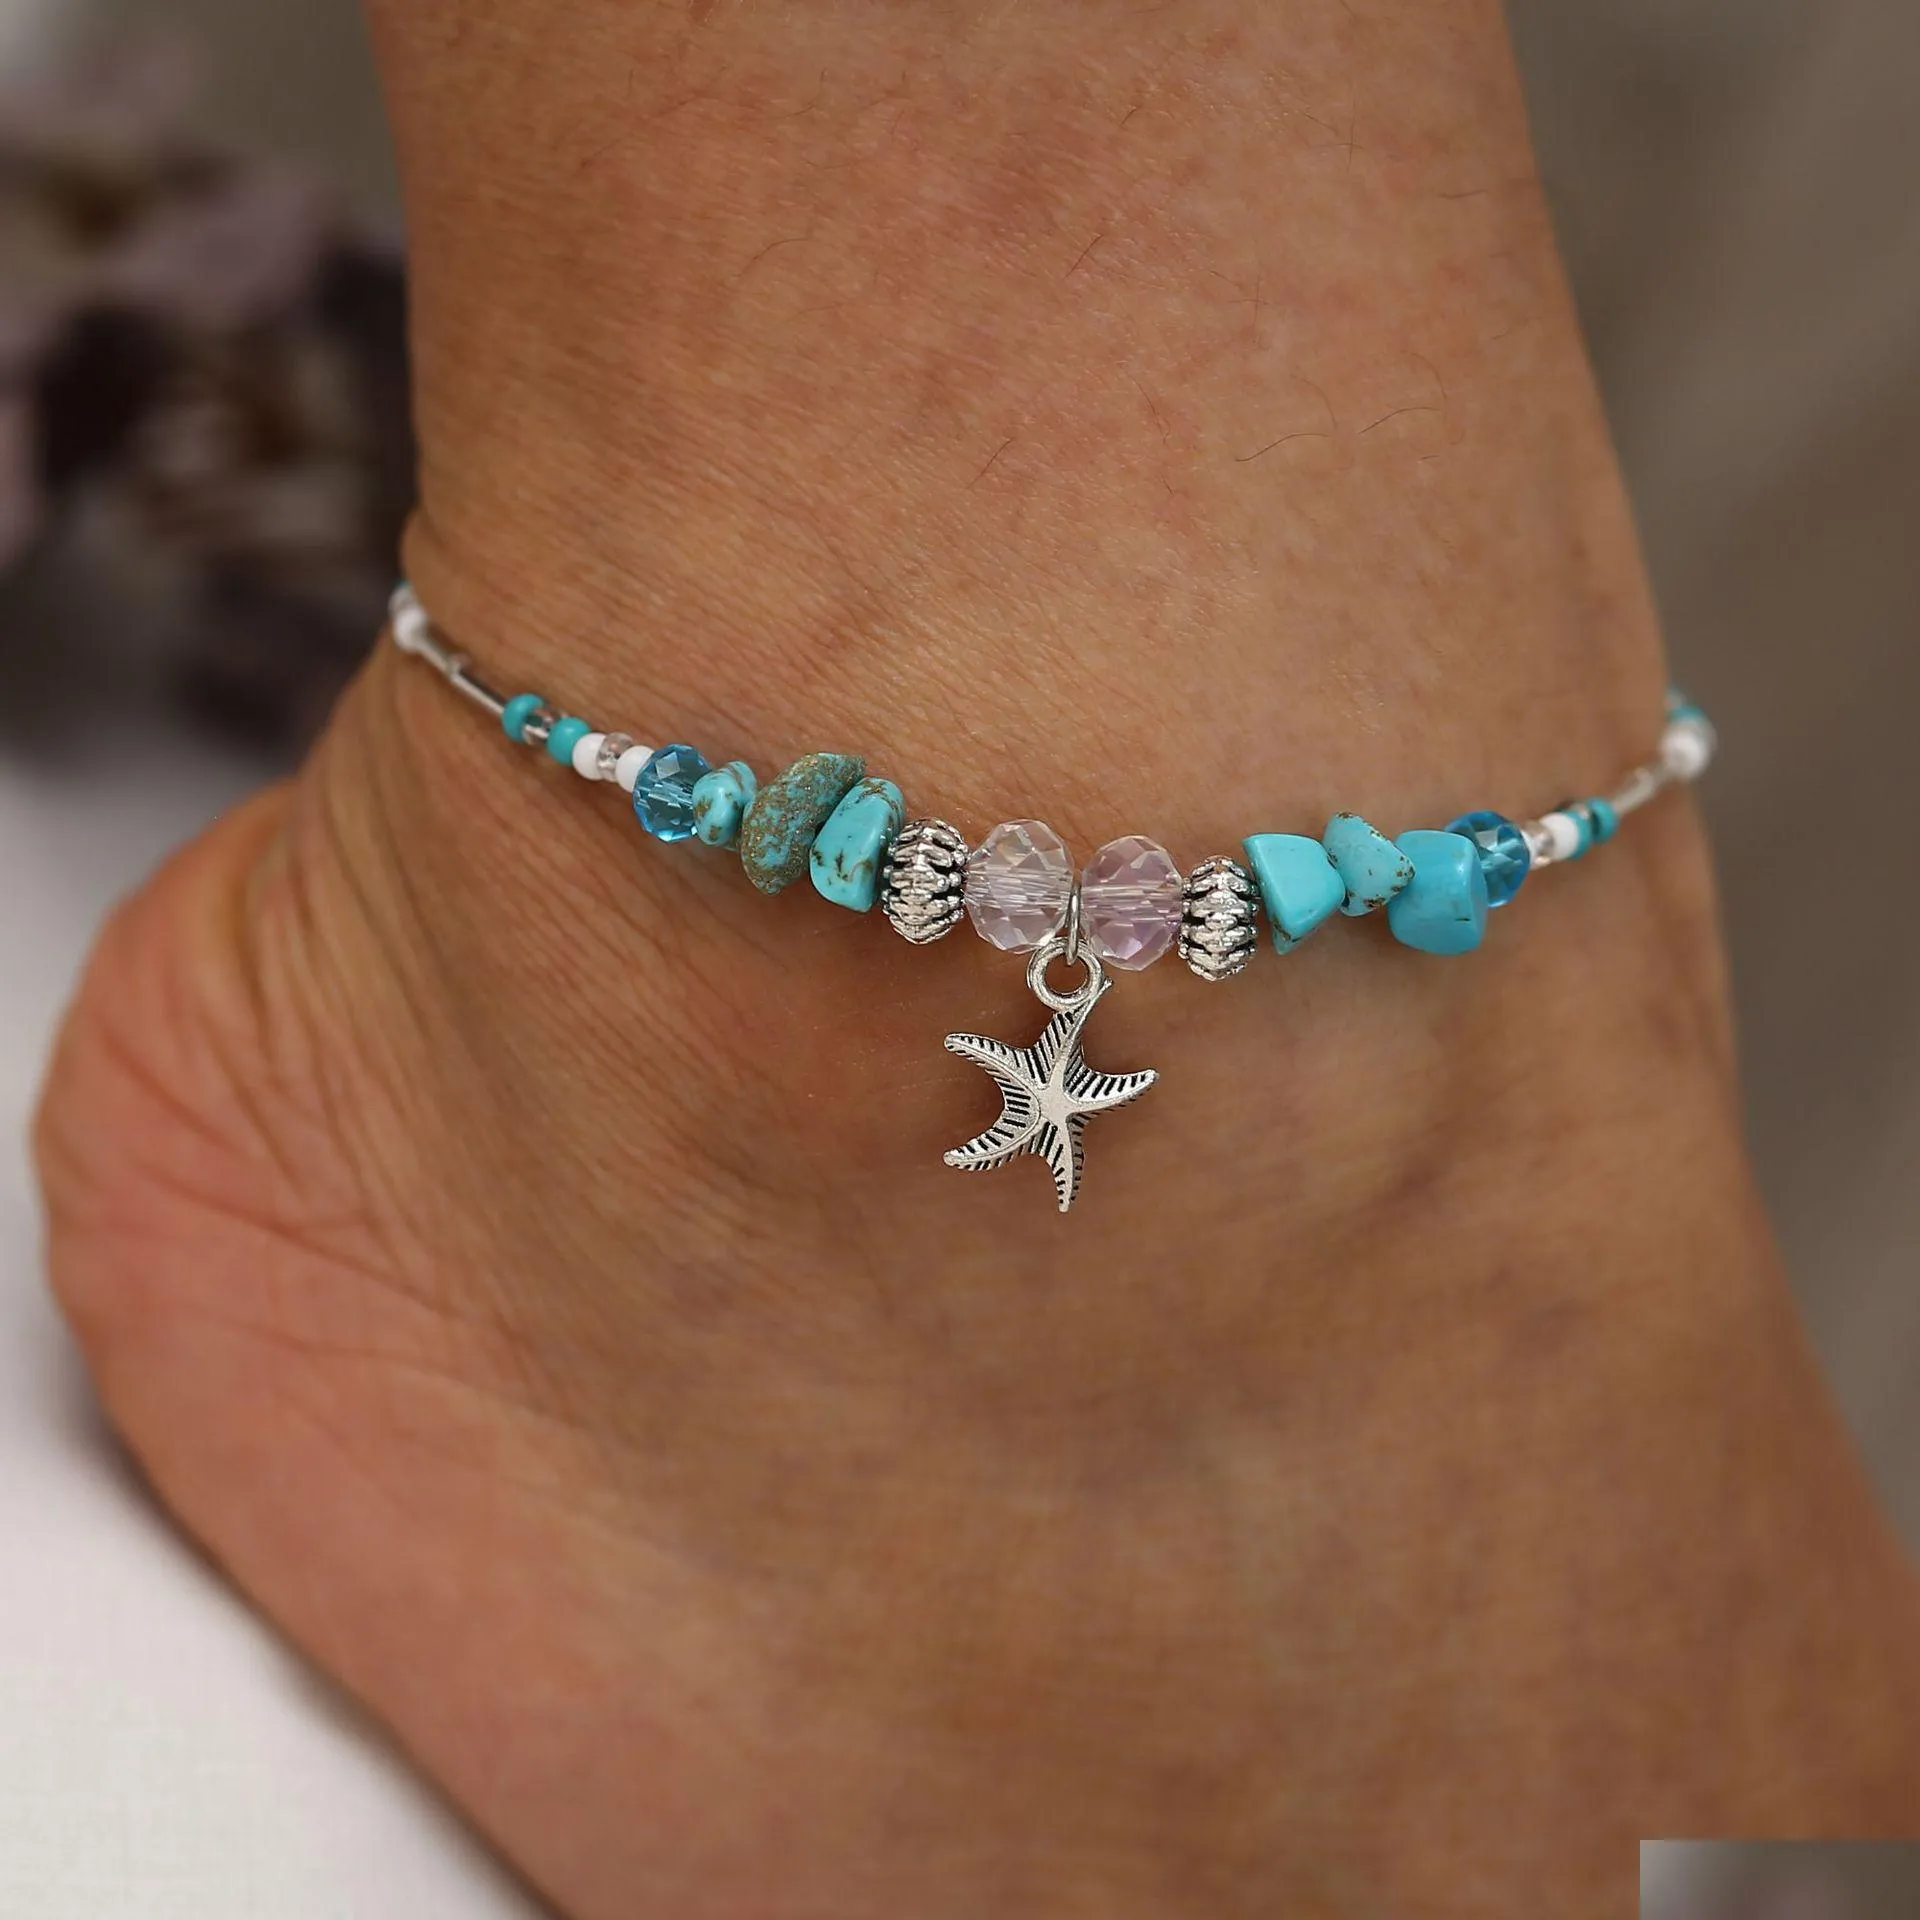 Anklets Böhmen Summer Starfish Beads Anklet Beach Chain Armband Ankle Jewelry for Women Girls Drop Delivery 2021 Bdesybag Otdbi